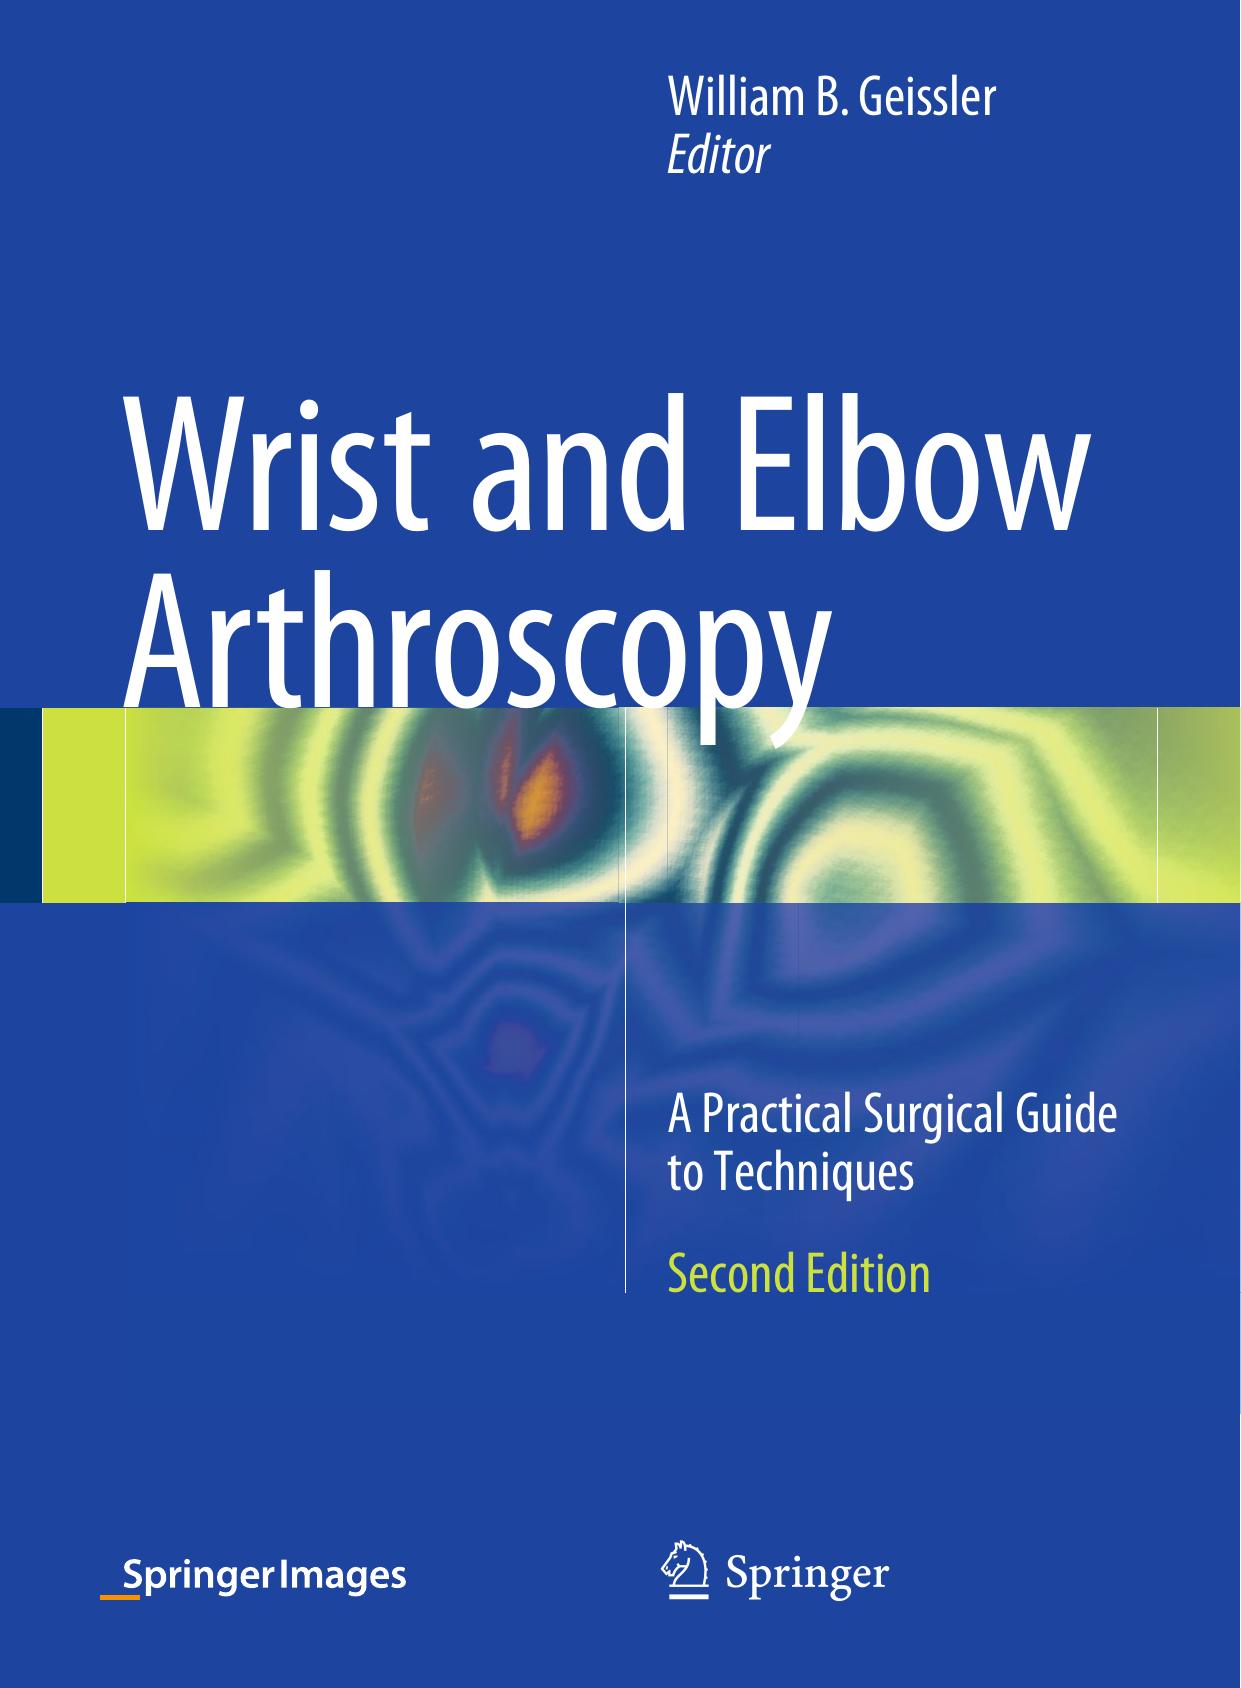 Wrist and Elbow Arthroscopy A Practical Surgical Guide to Techniques 2nd Edition.jpg